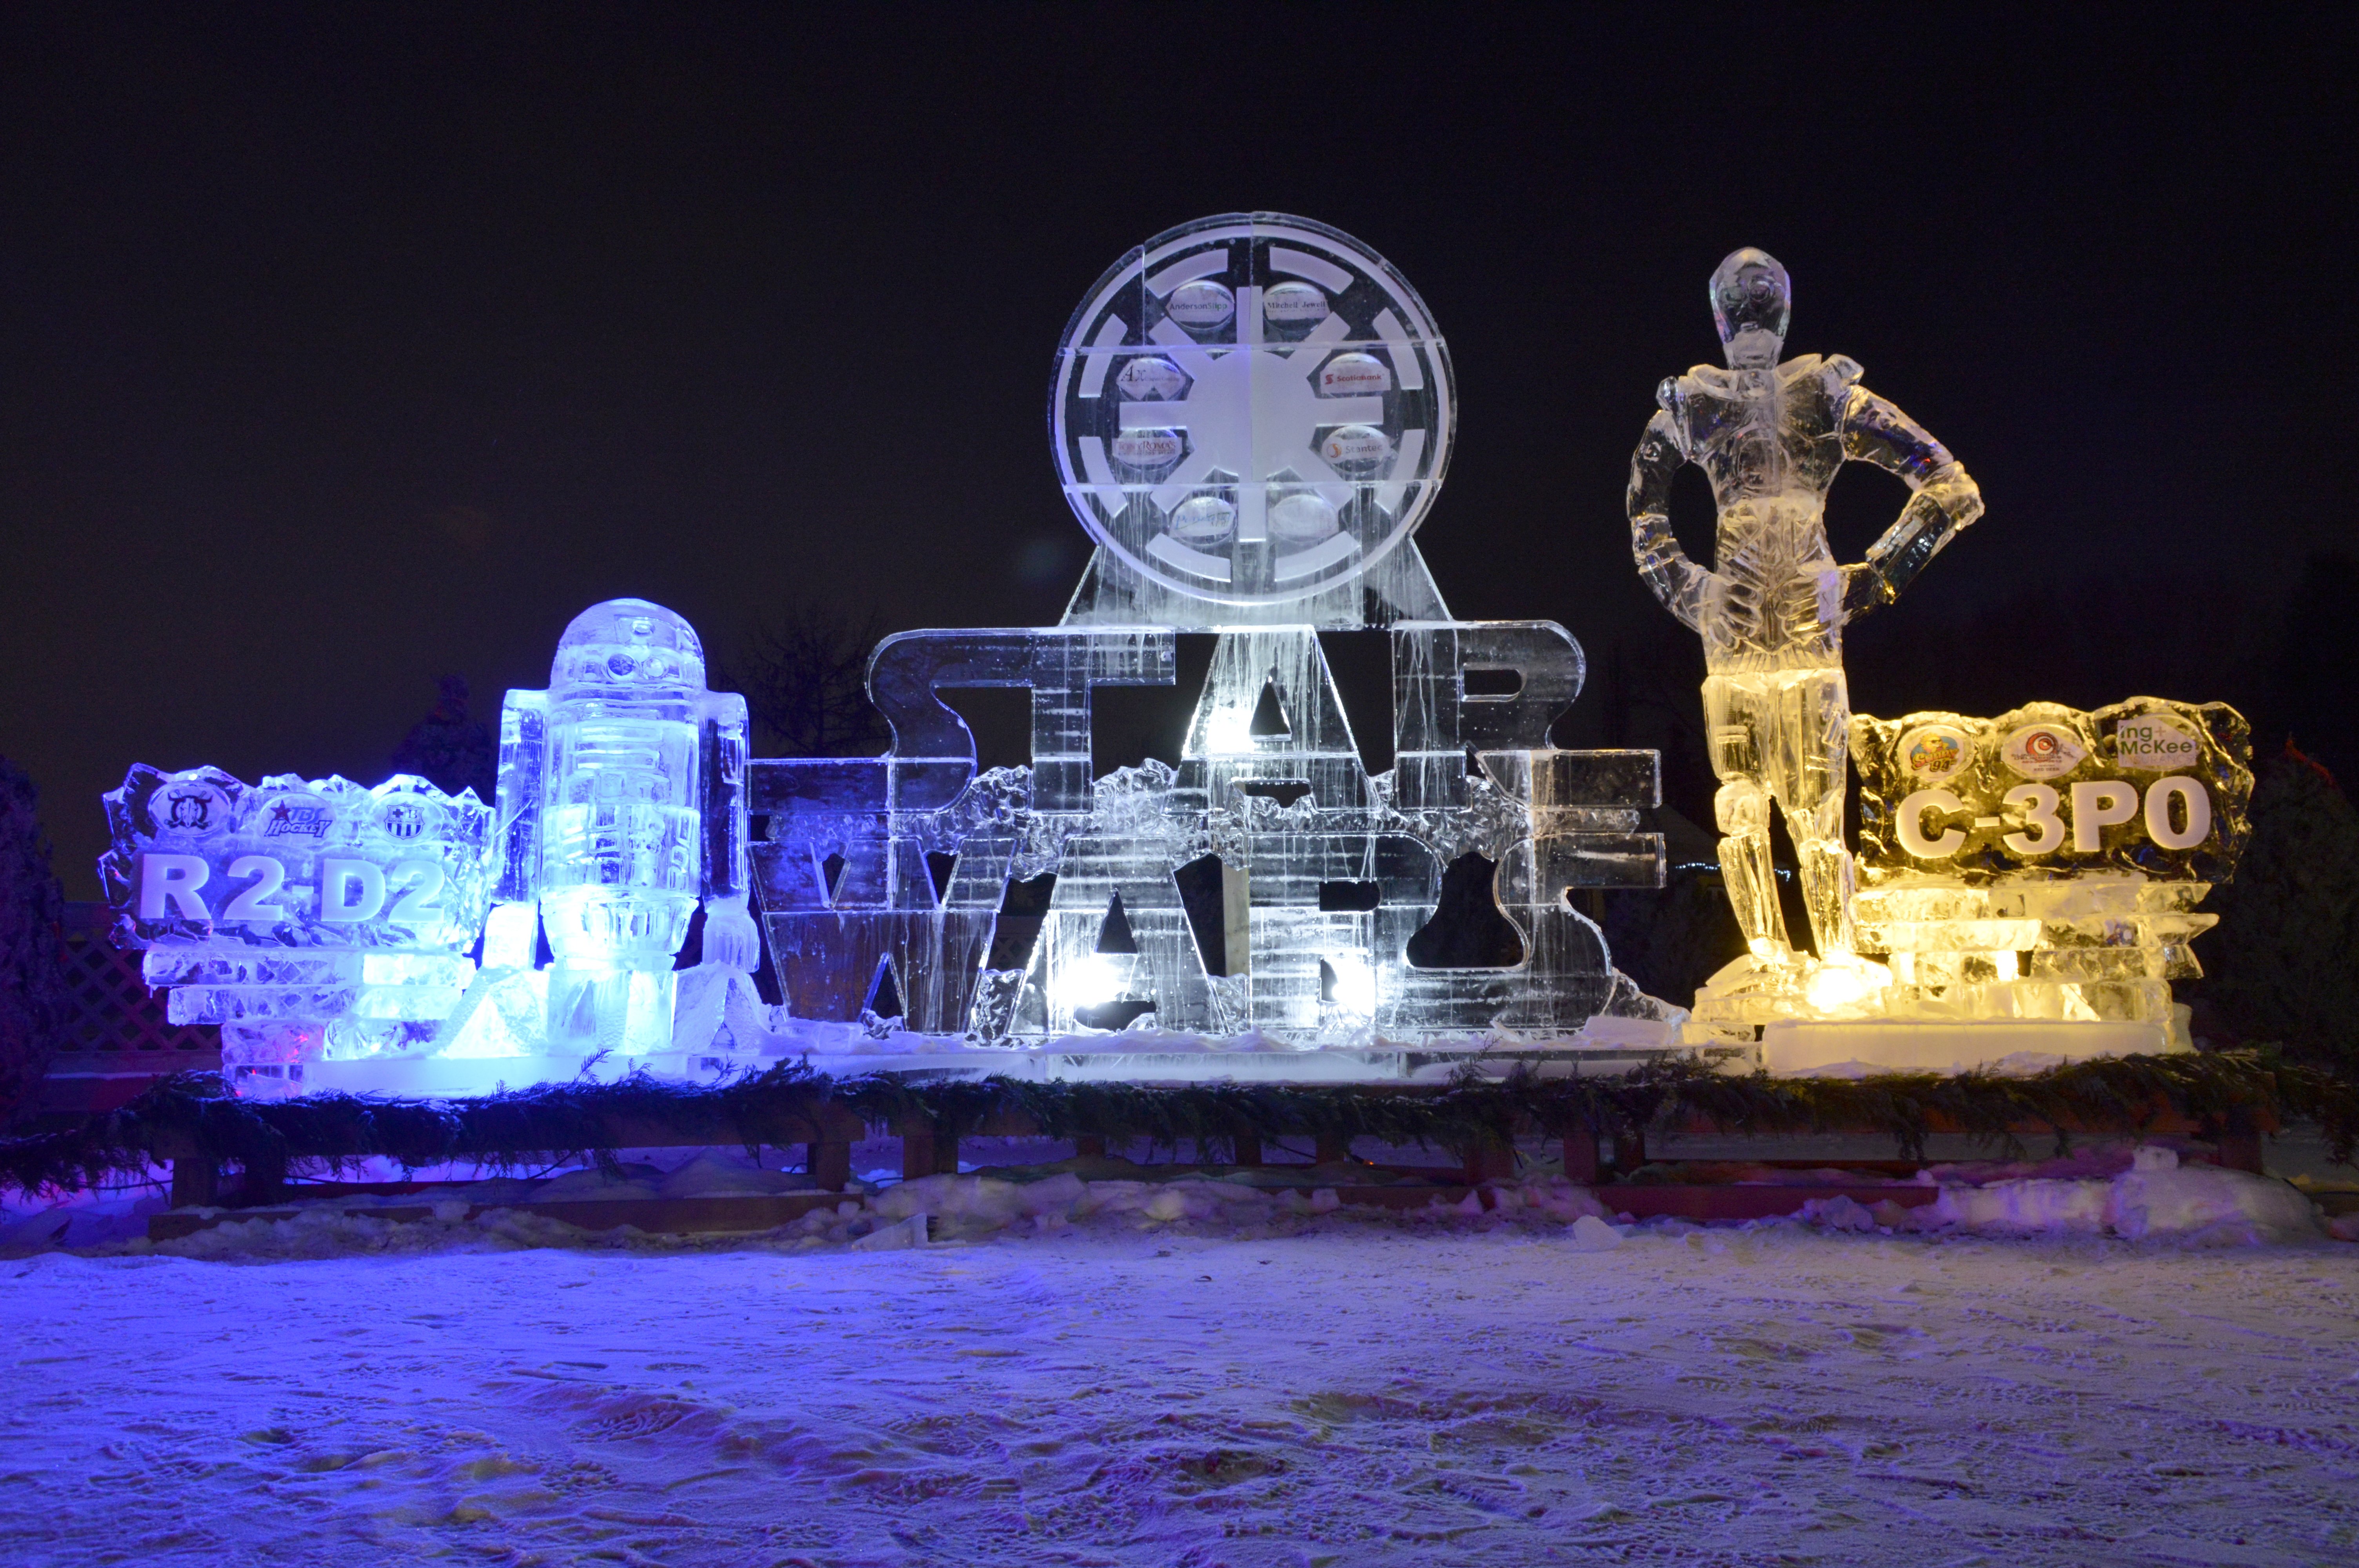 ICE SCULPTURES - This year’s theme for the ice sculptures at the Parkland Garden Centre is Star Wars. The exhibit